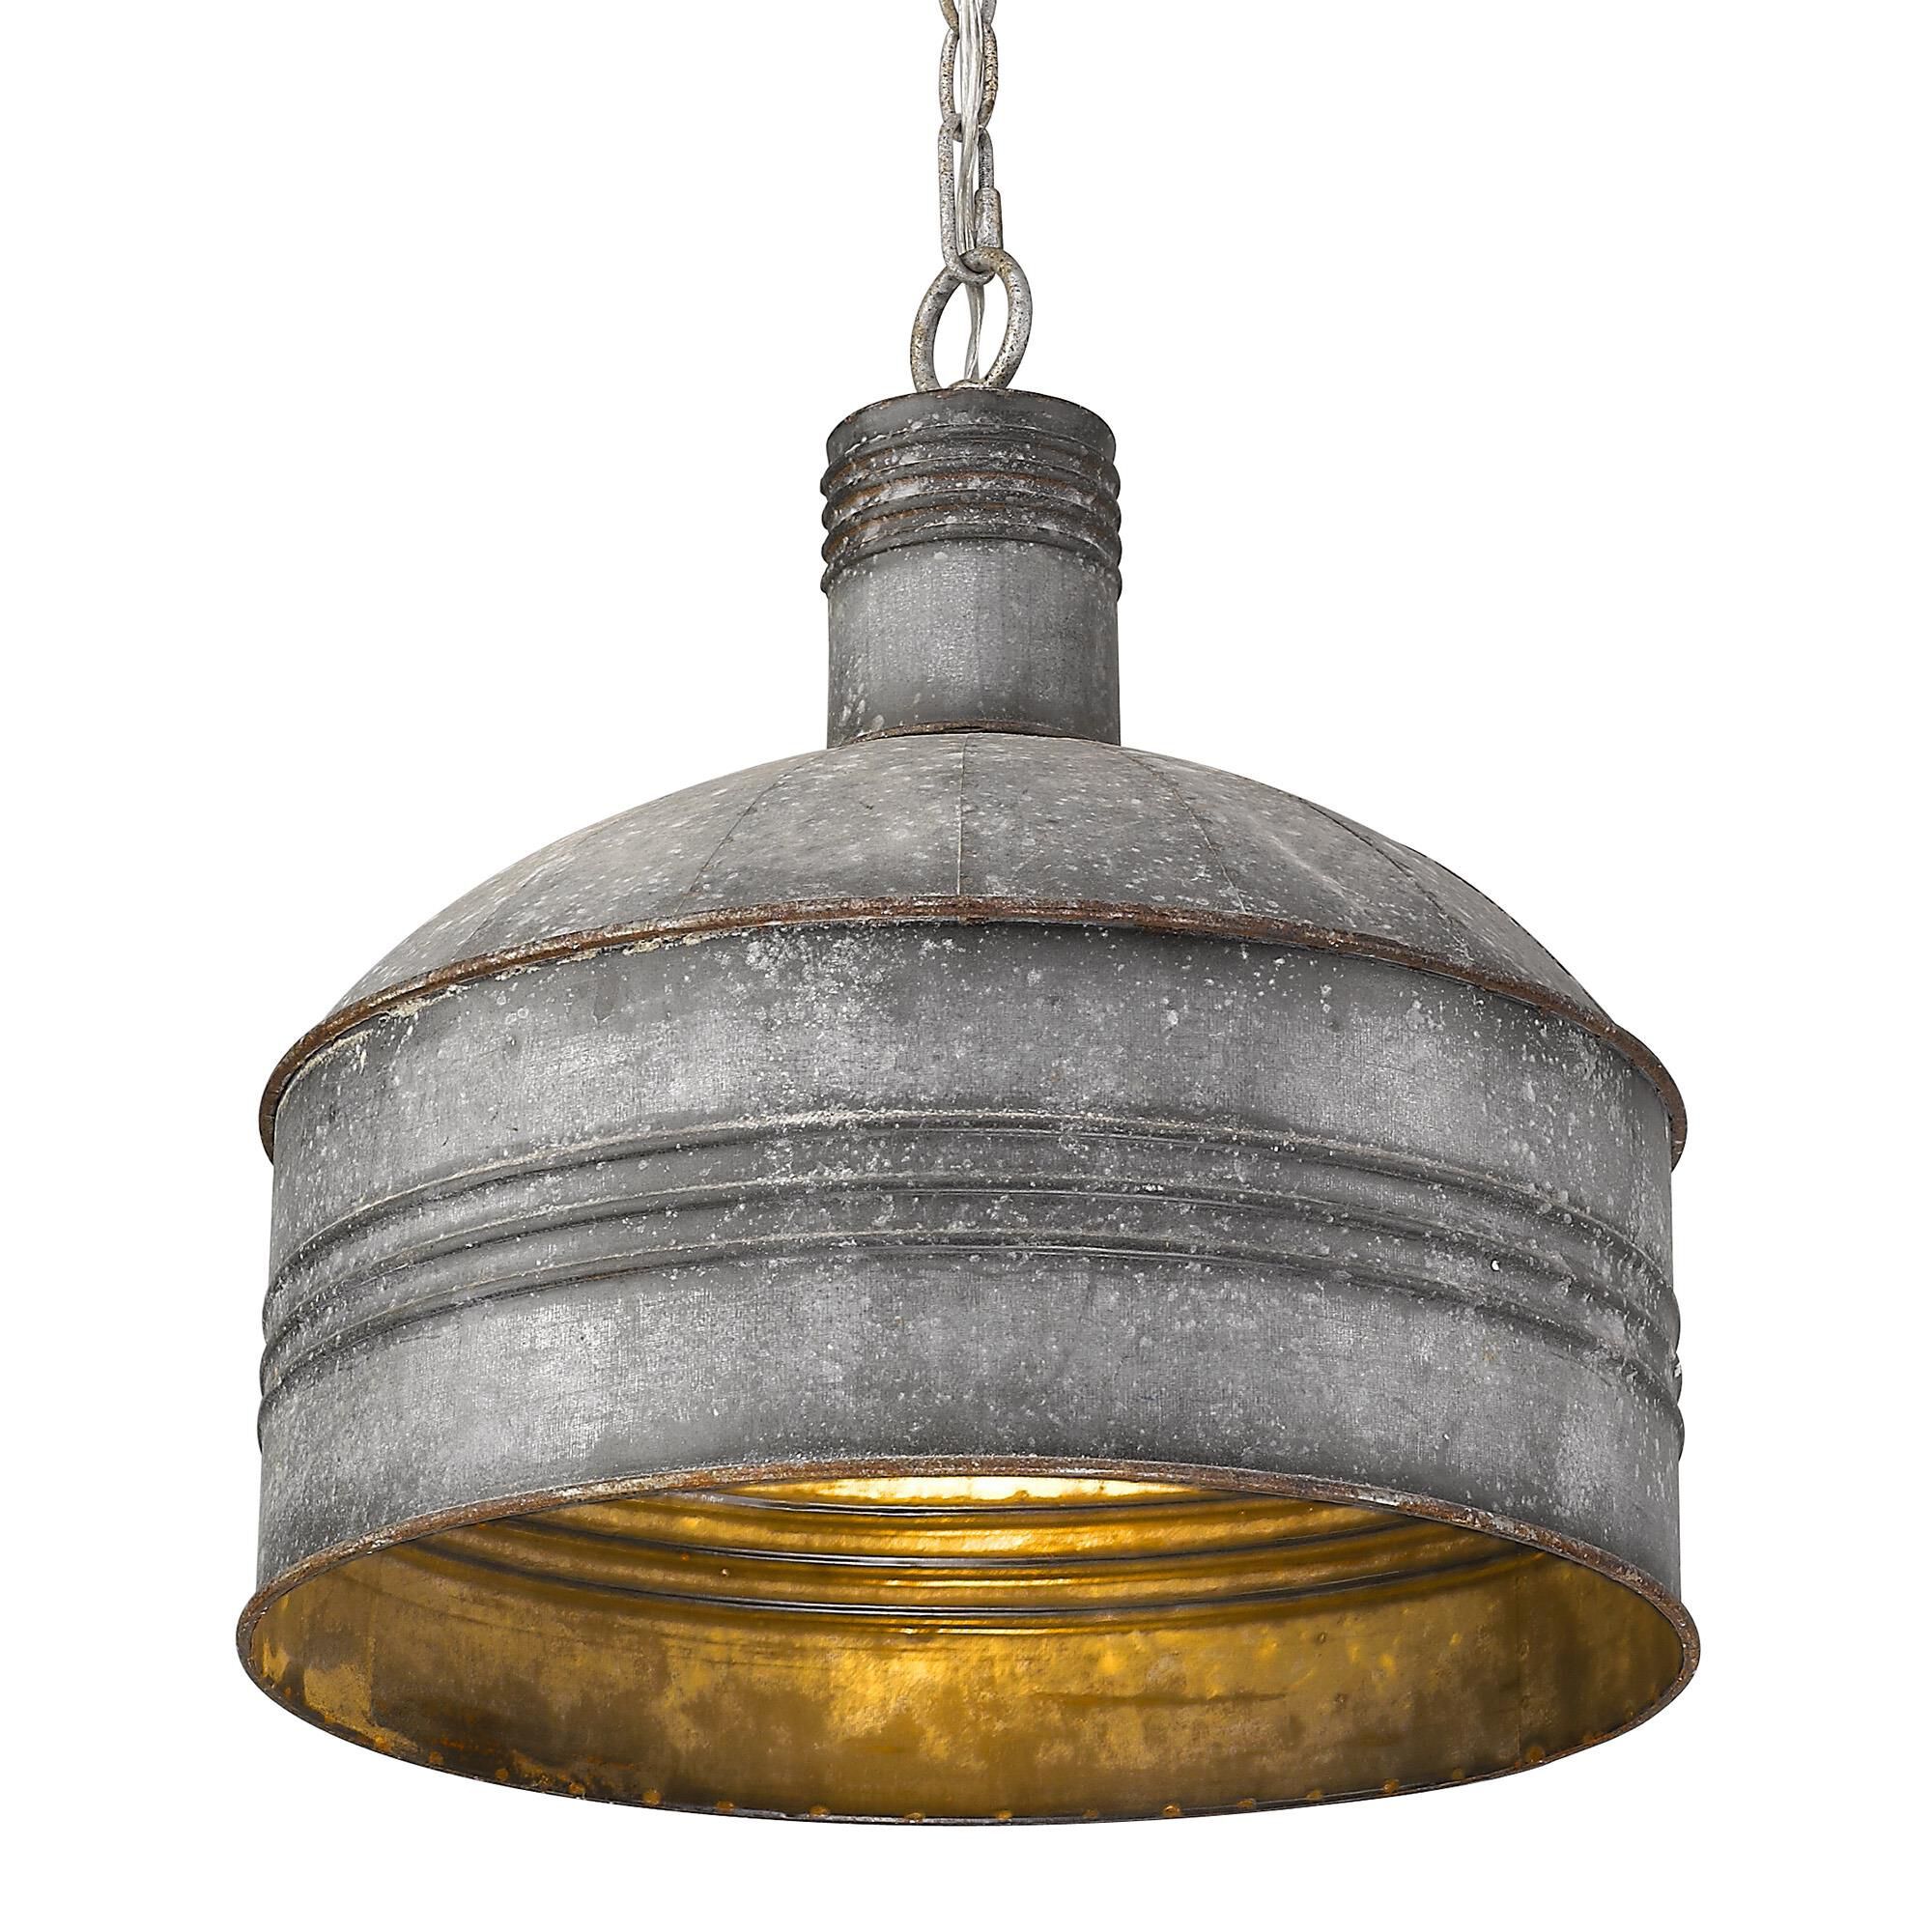 Shiloh 15 Inch Cage Pendant by Golden Lighting | 1800 Lighting